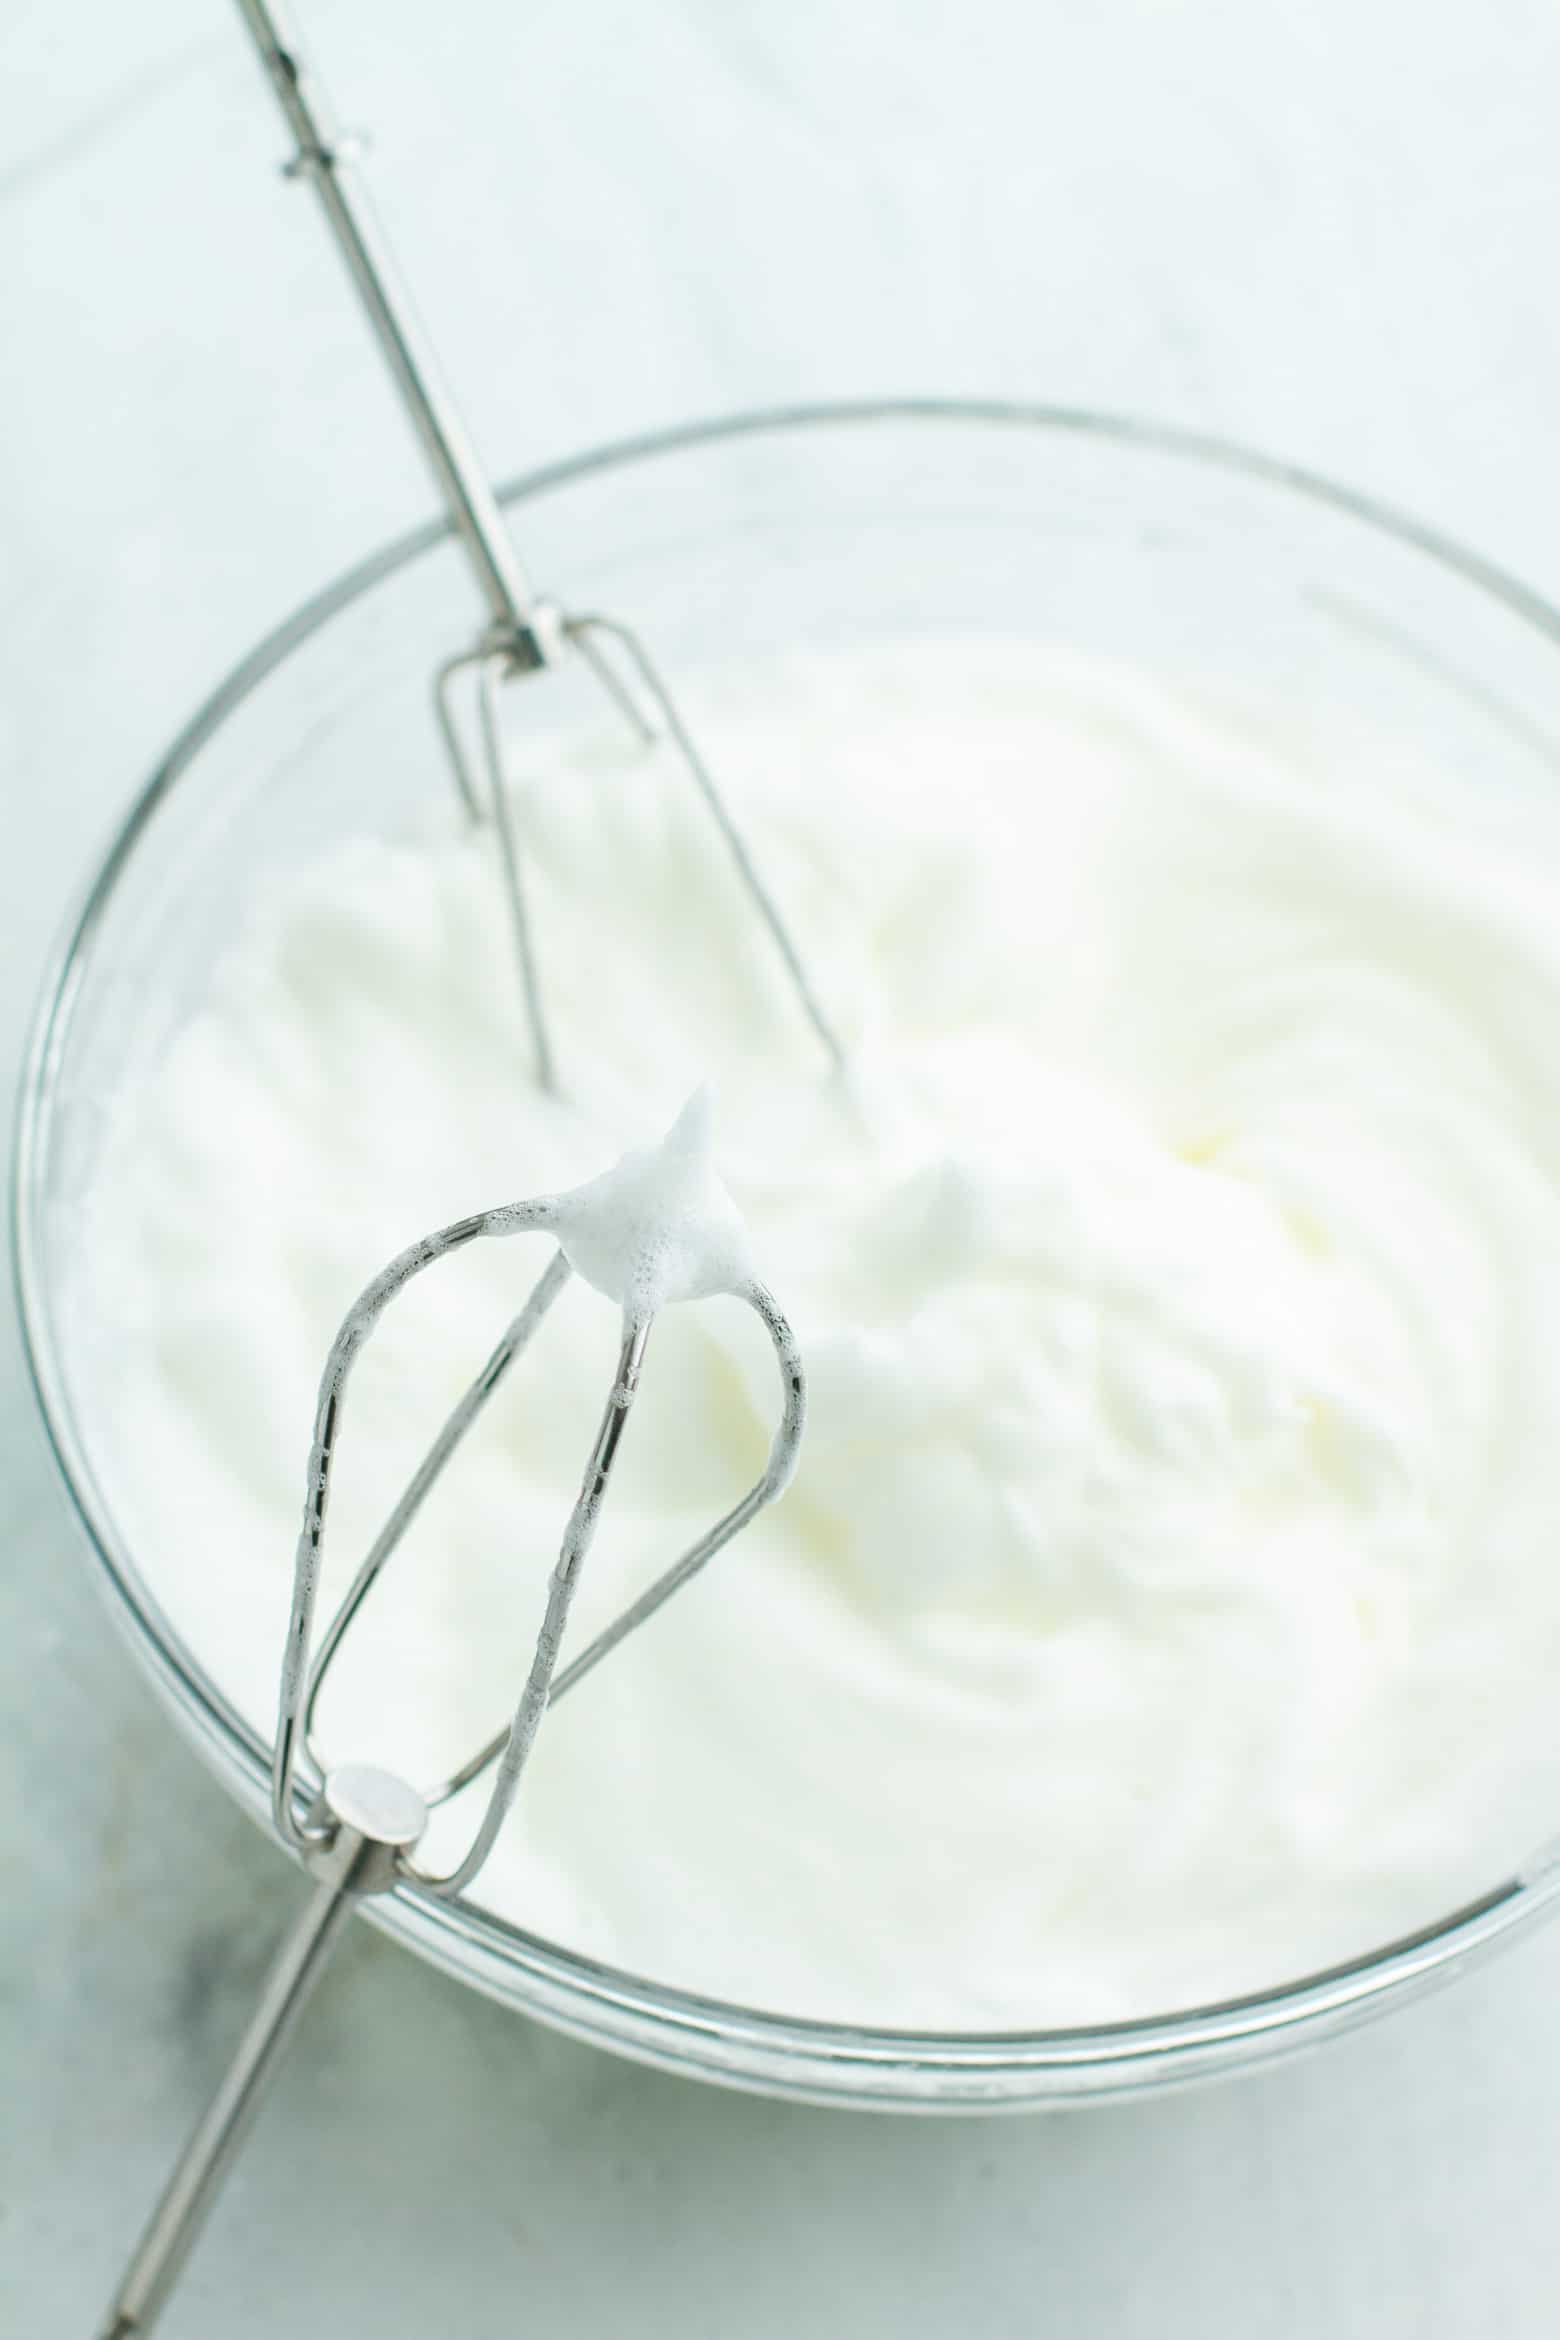 Egg whites beat to a stiff peak in a bowl with beaters.